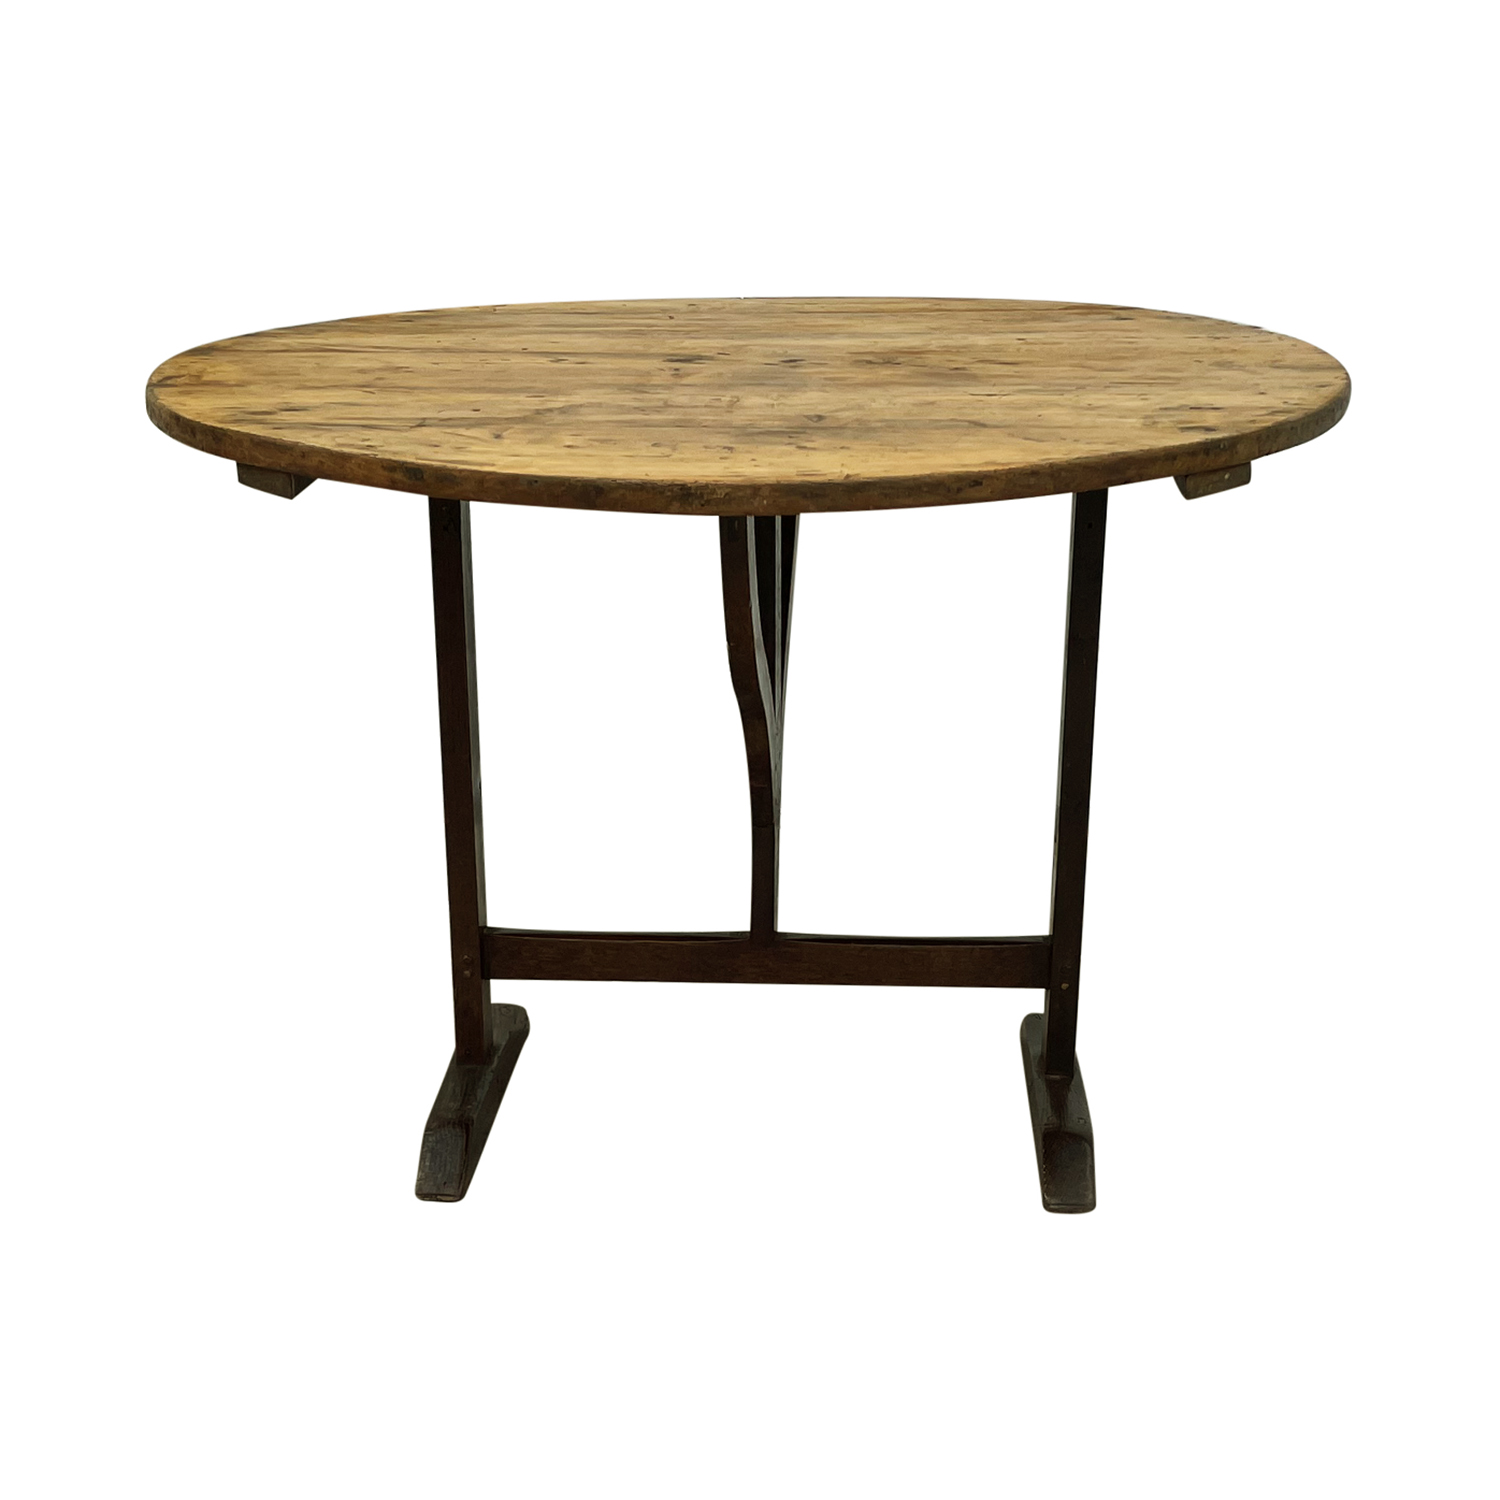 19th Century French Provincial Walnut Folding Wine Table – Antique Side Table